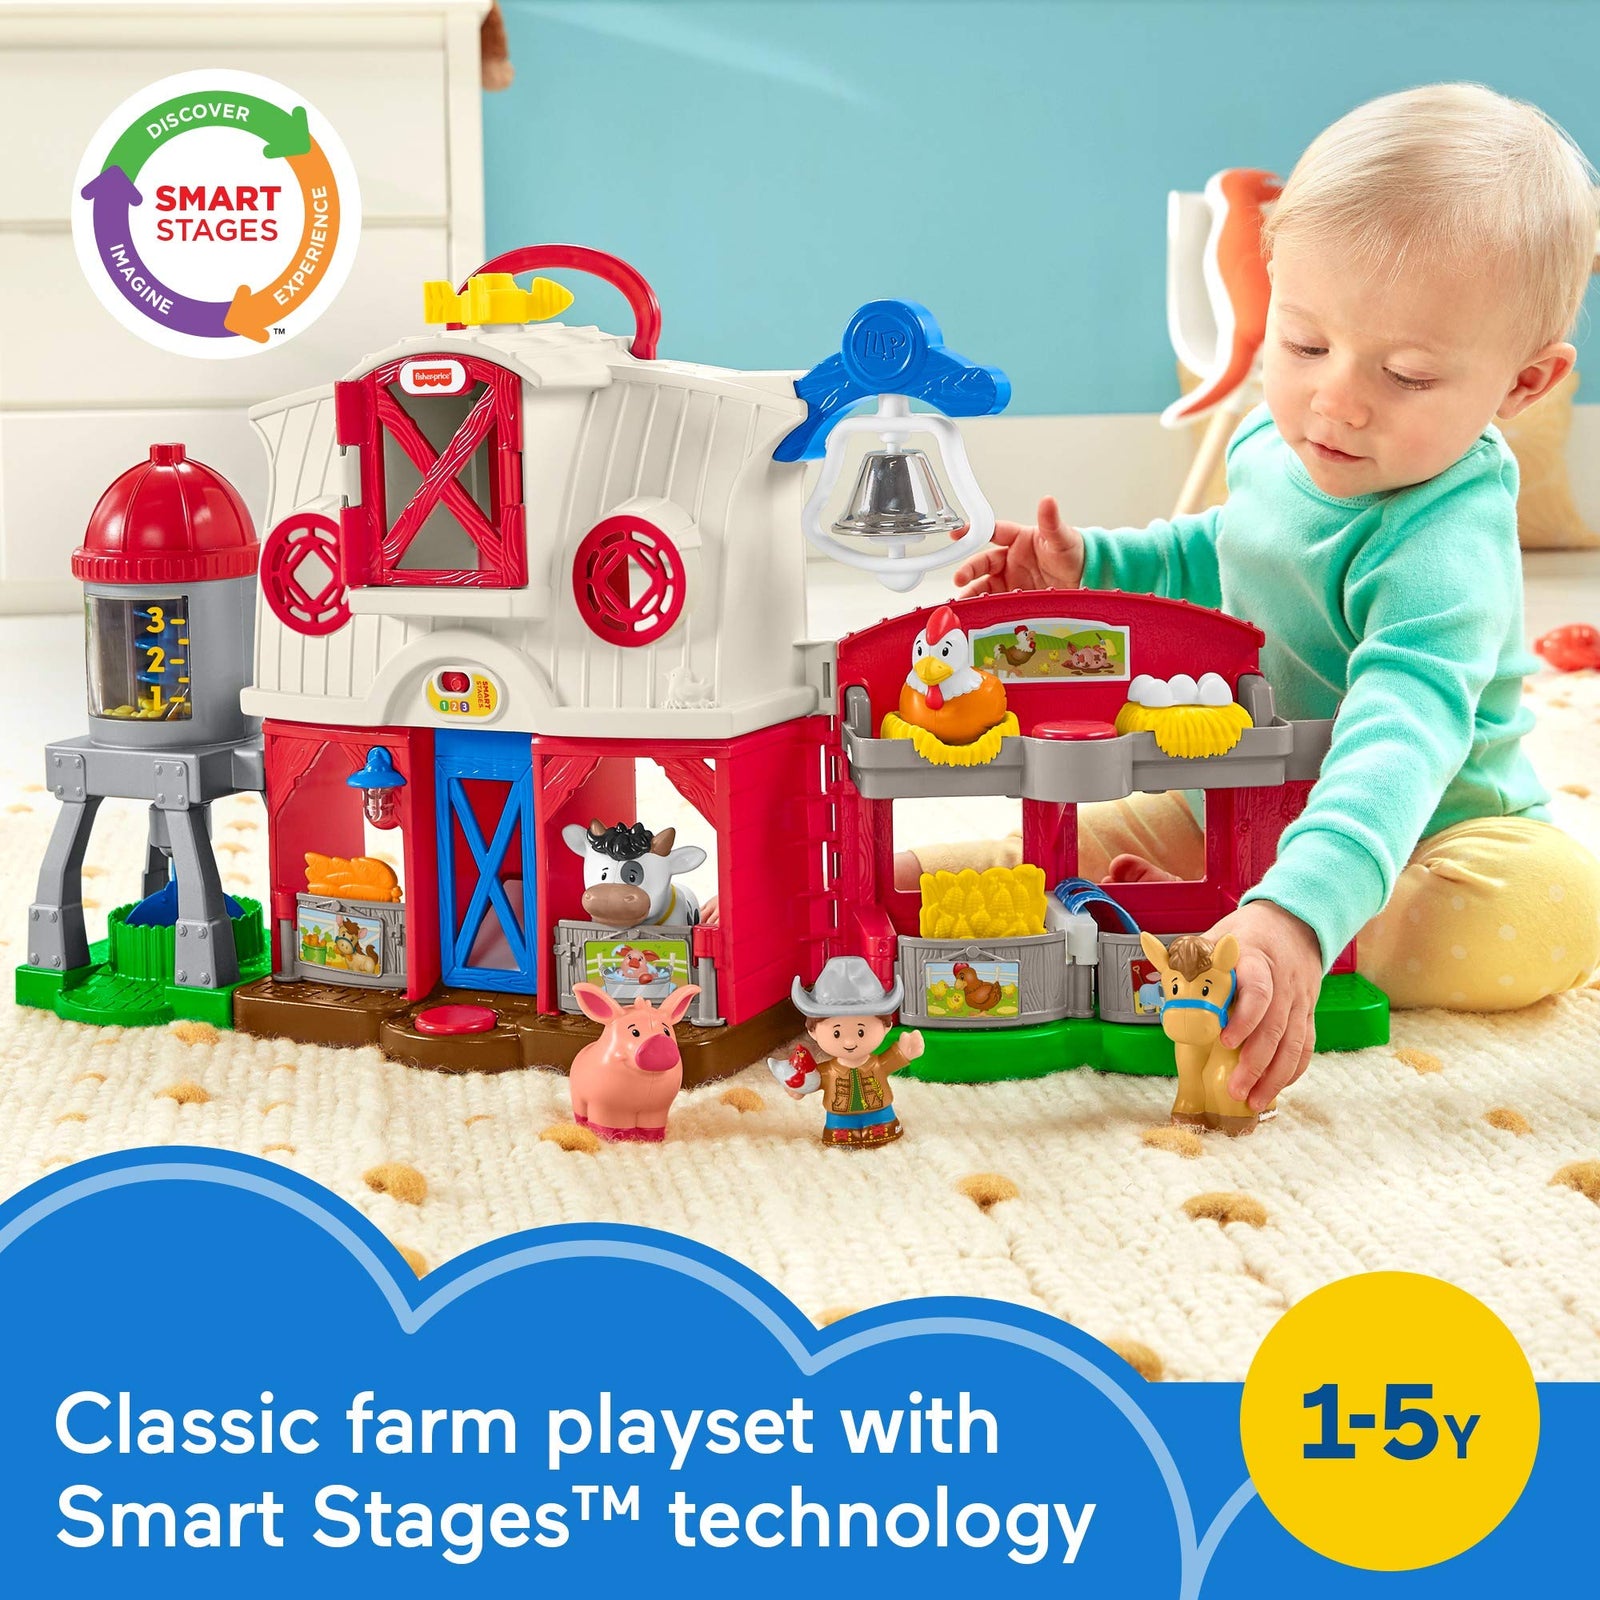 Fisher-Price Little People Caring for Animals Farm Playset with Smart Stages Learning Content for Toddlers and Preschool Kids